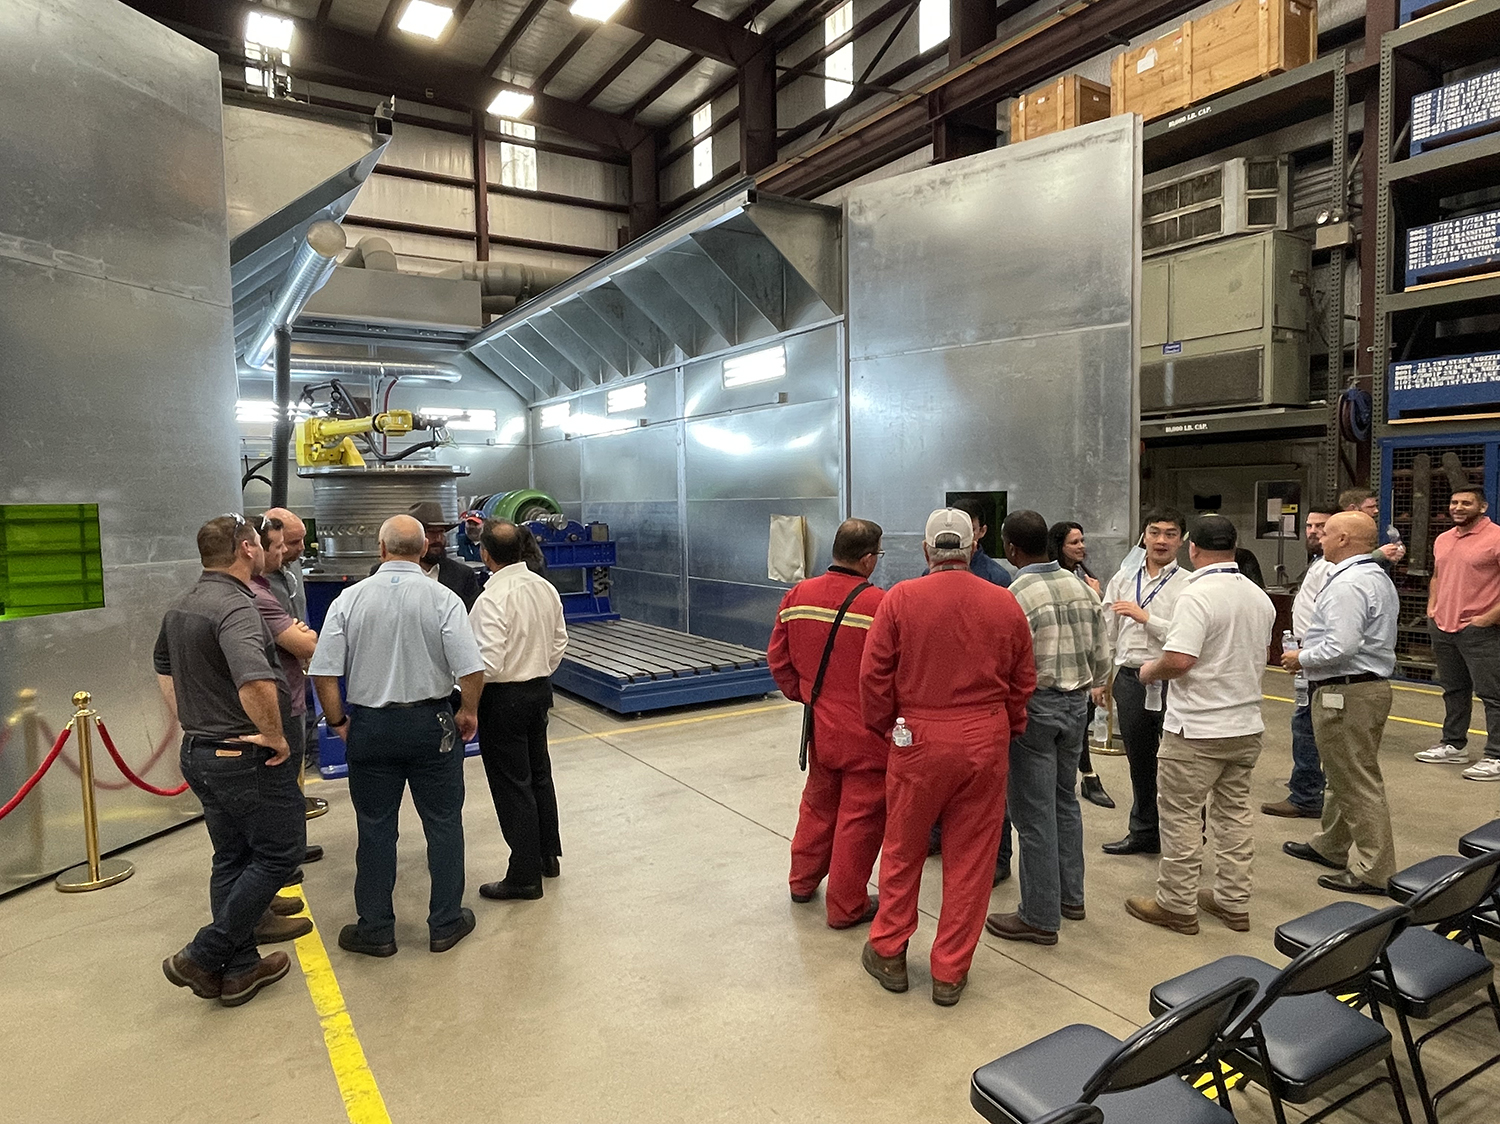 During the day, attendees were treated to private tours of this advanced additive manufacturing process with Sulzer experts on hand to explain the multiple benefits for turbomachinery repair and upgrade projects.